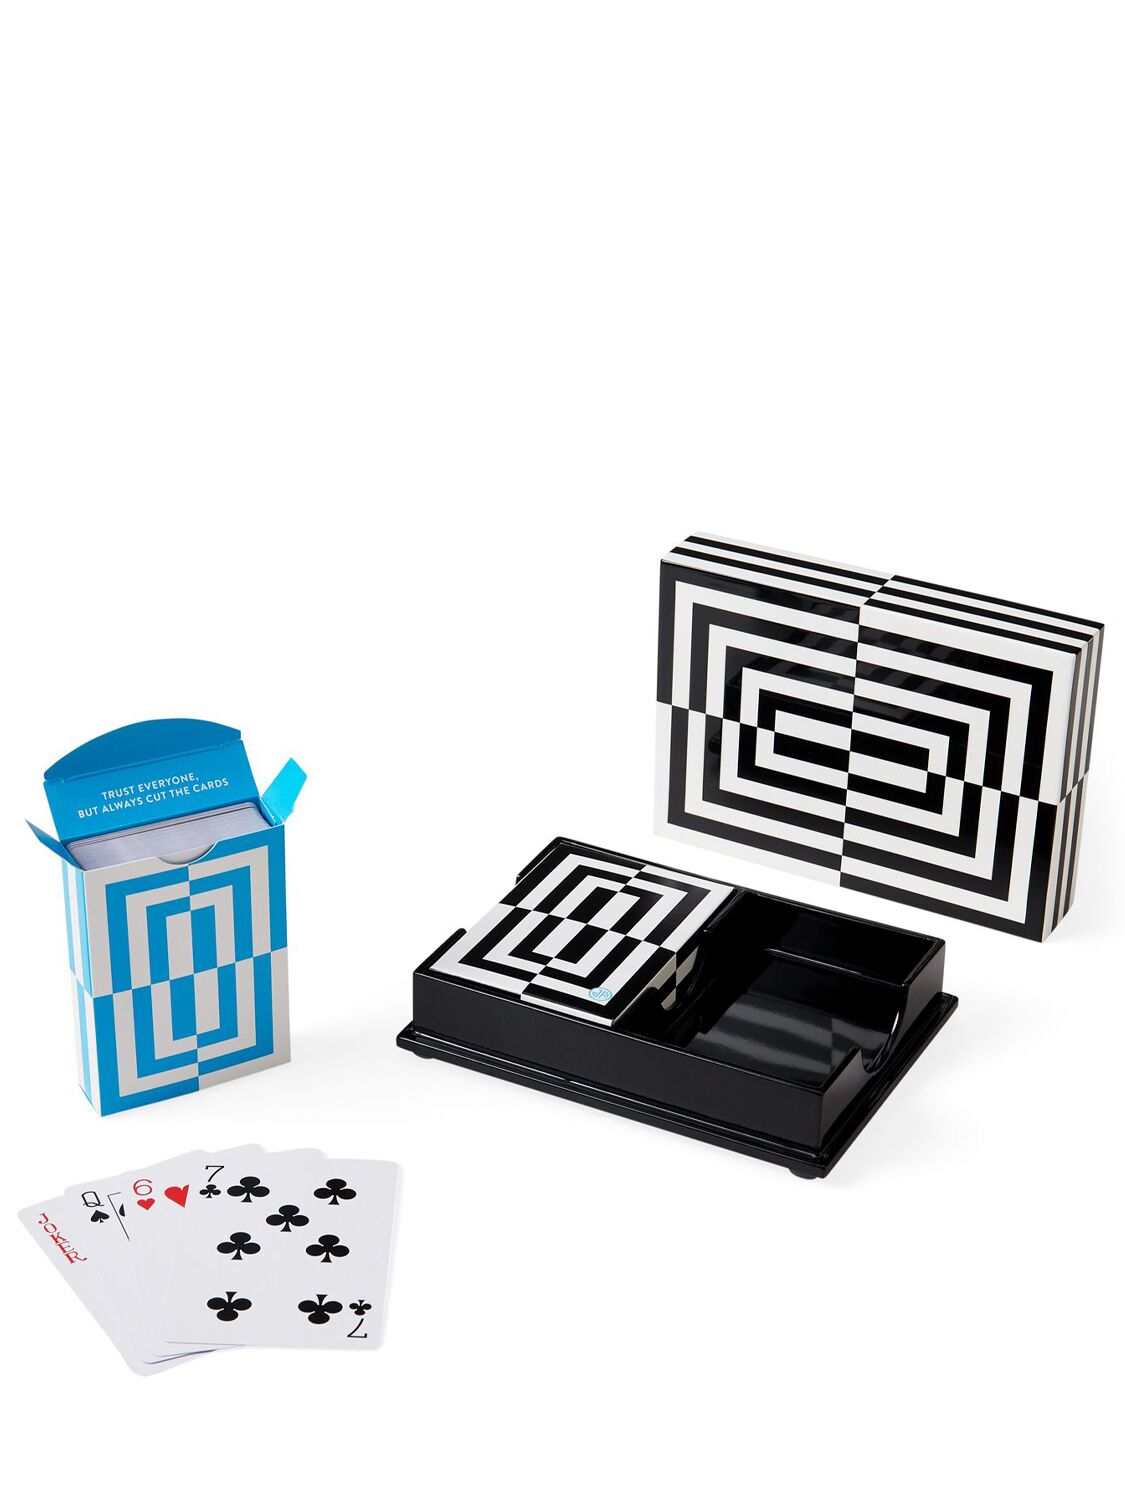 Jonathan Adler Op Art Lacquer Box & Playing Cards Set In Black